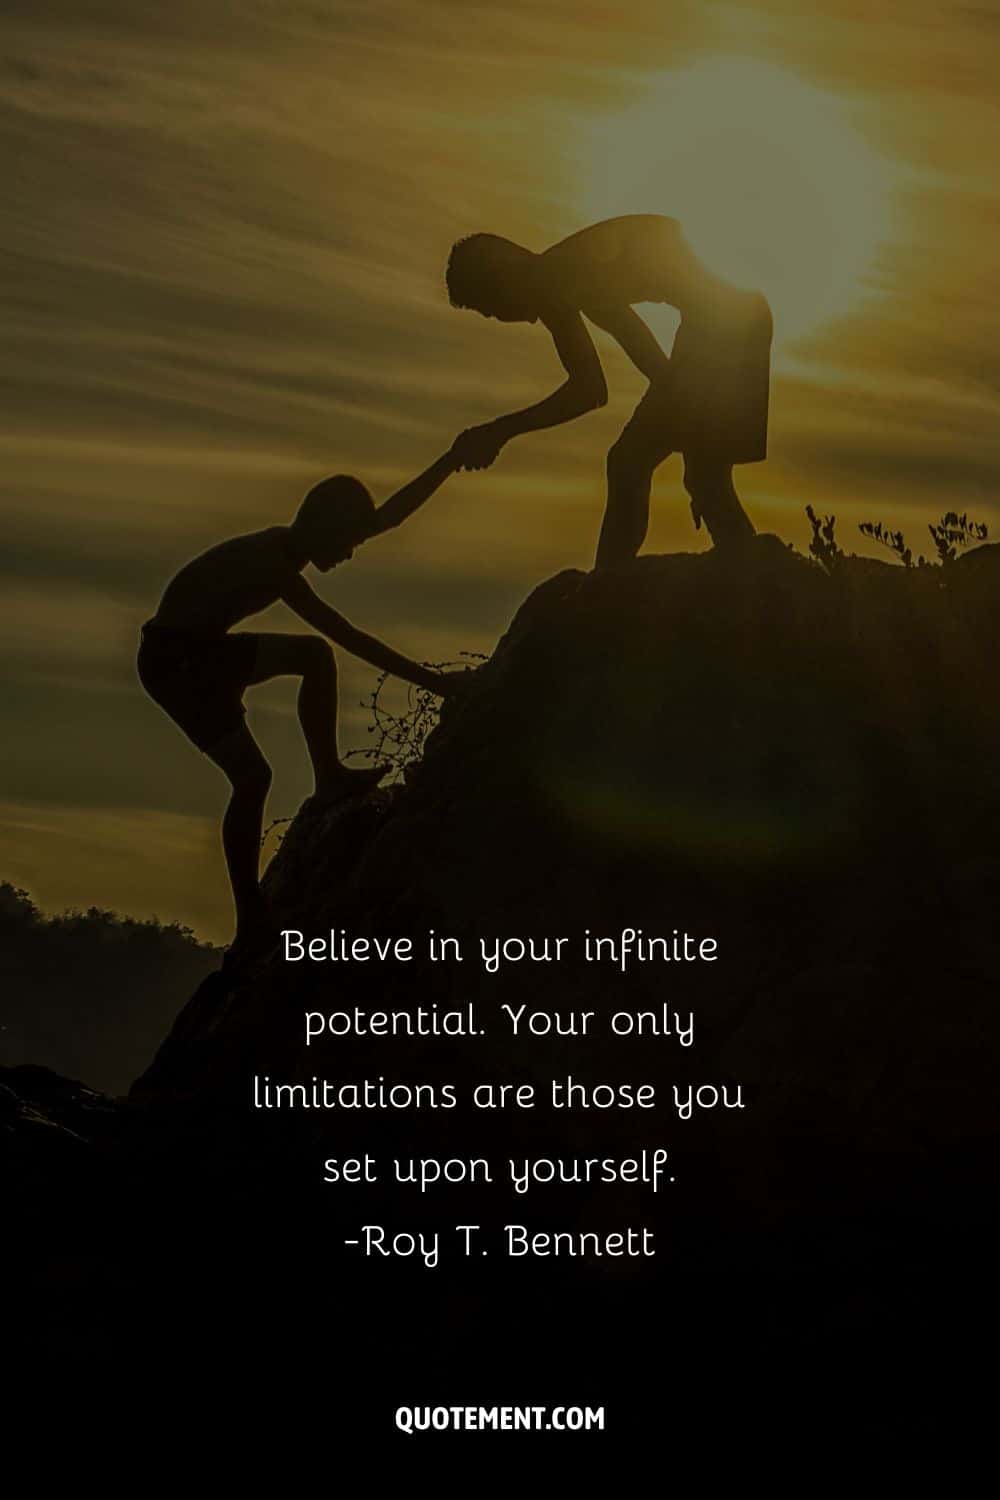 two boys climbing image representing empowering believe in yourself quote